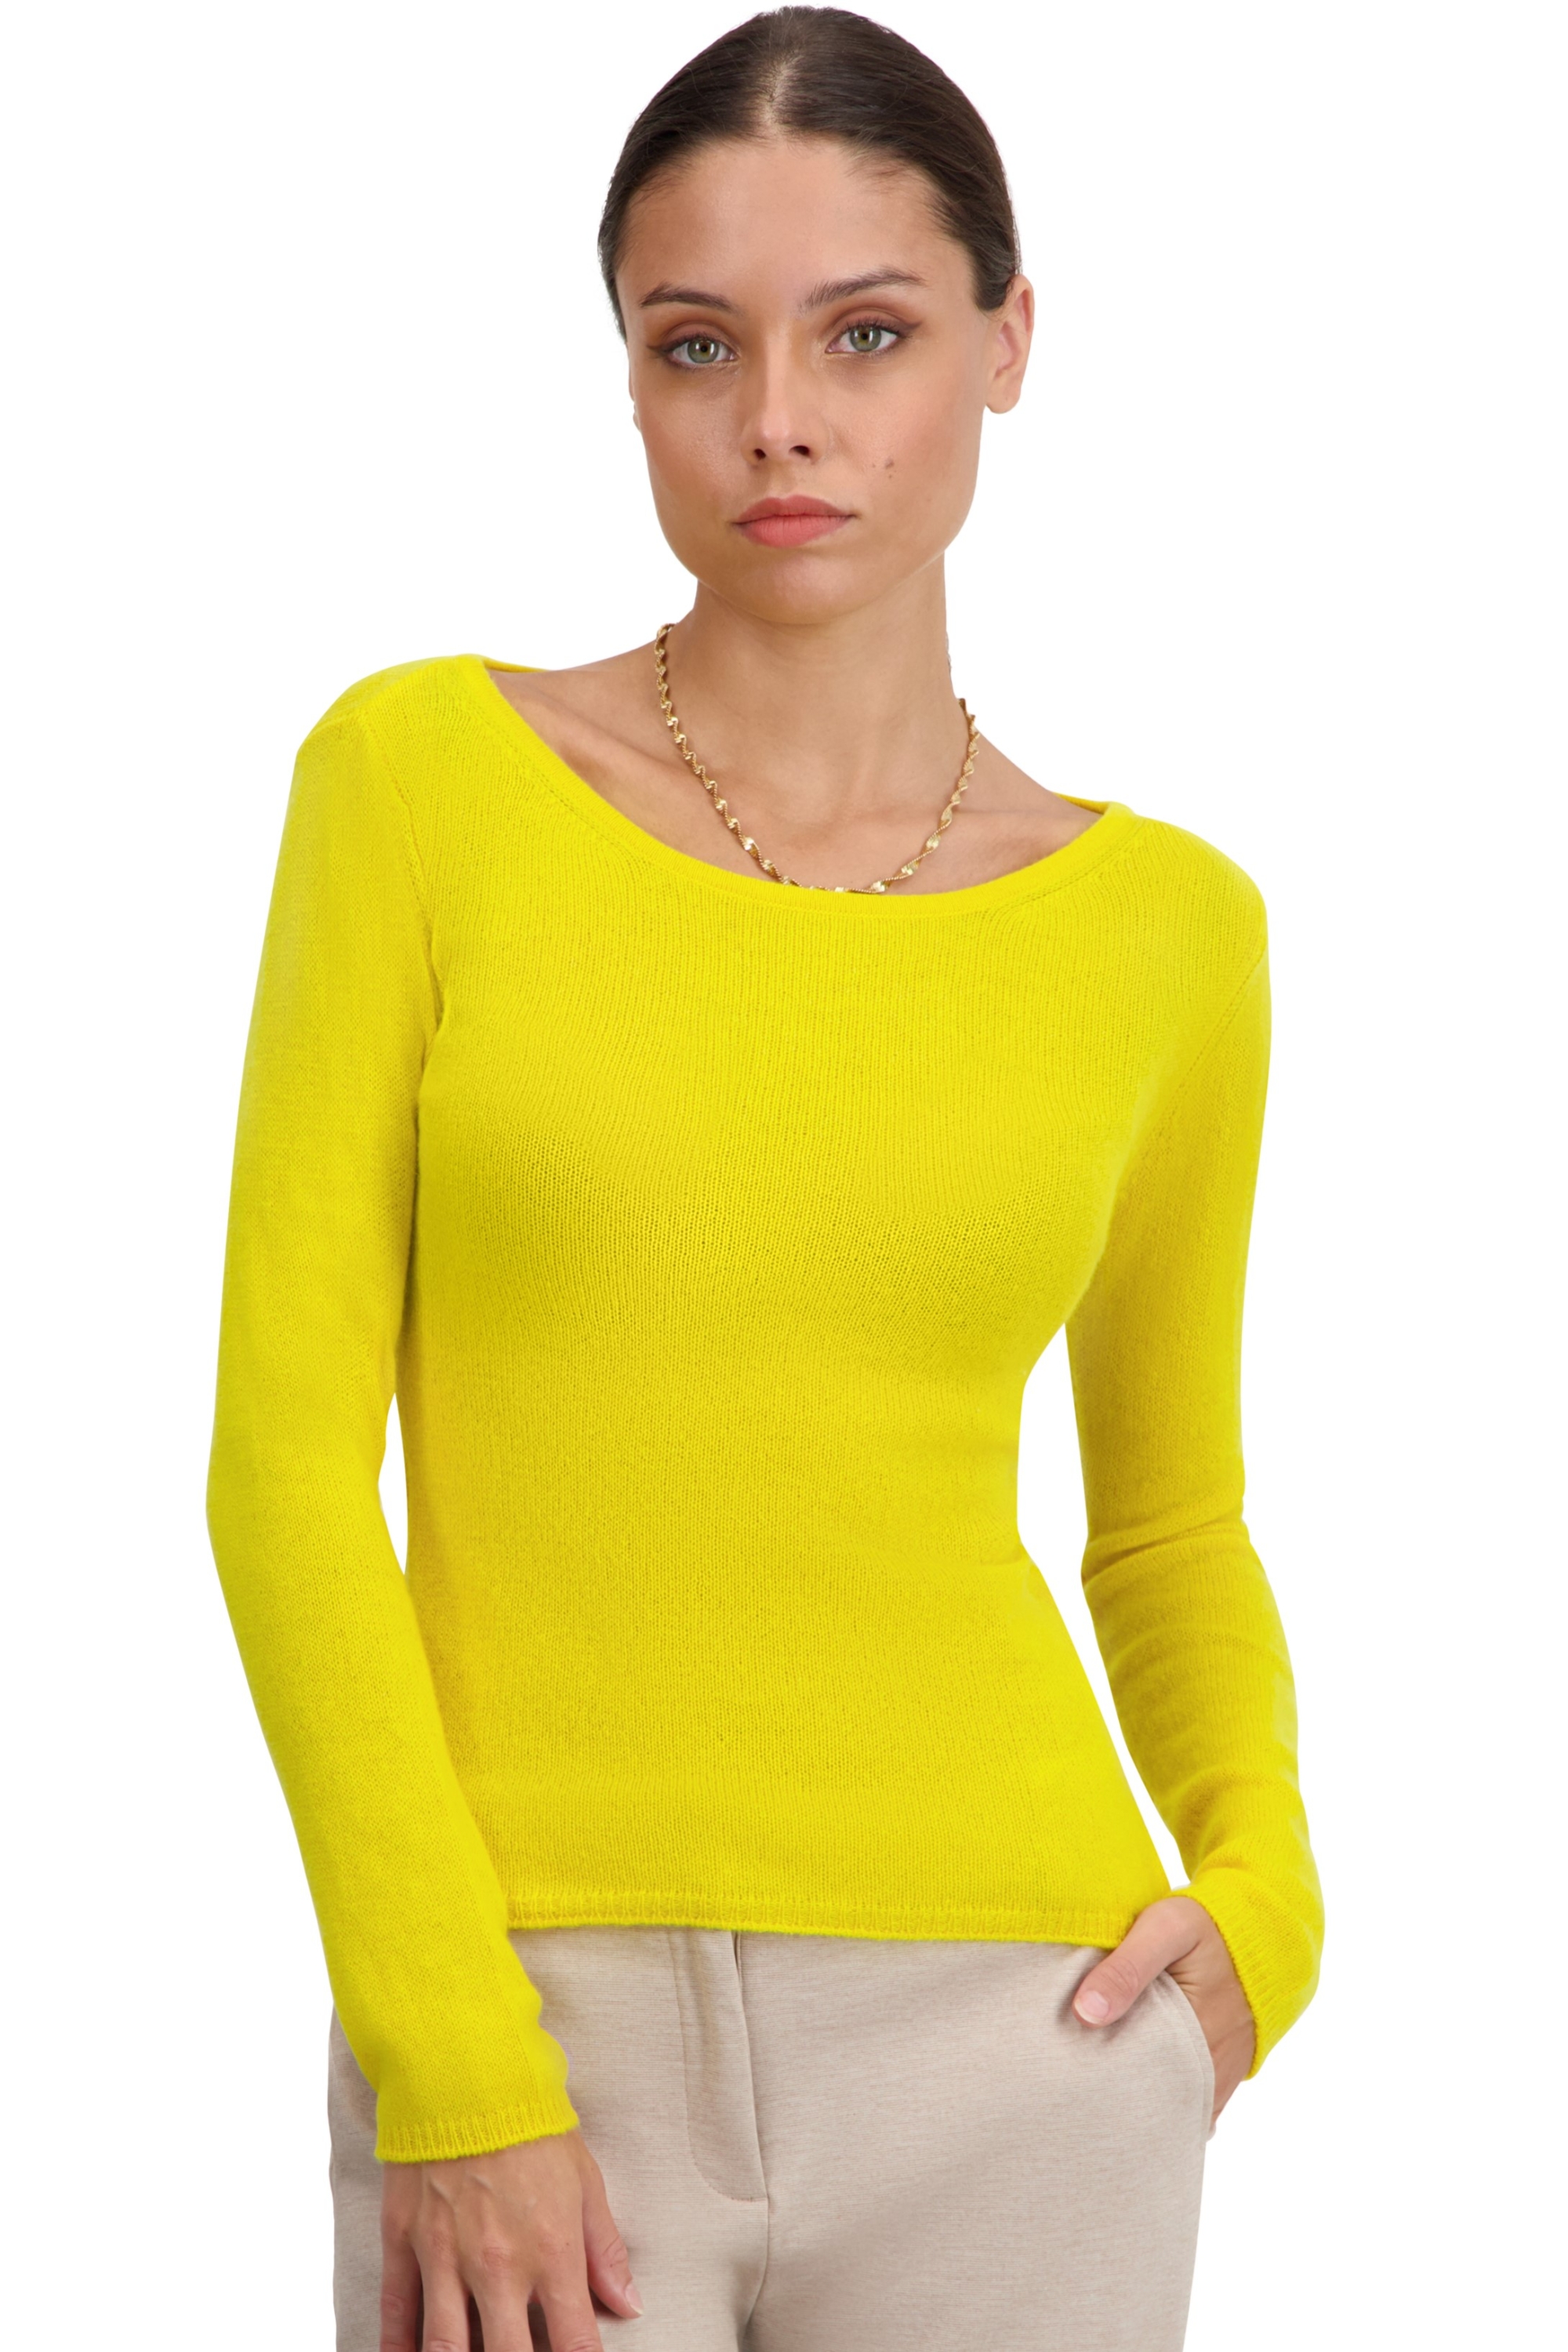 Cashmere ladies timeless classics caleen cyber yellow s